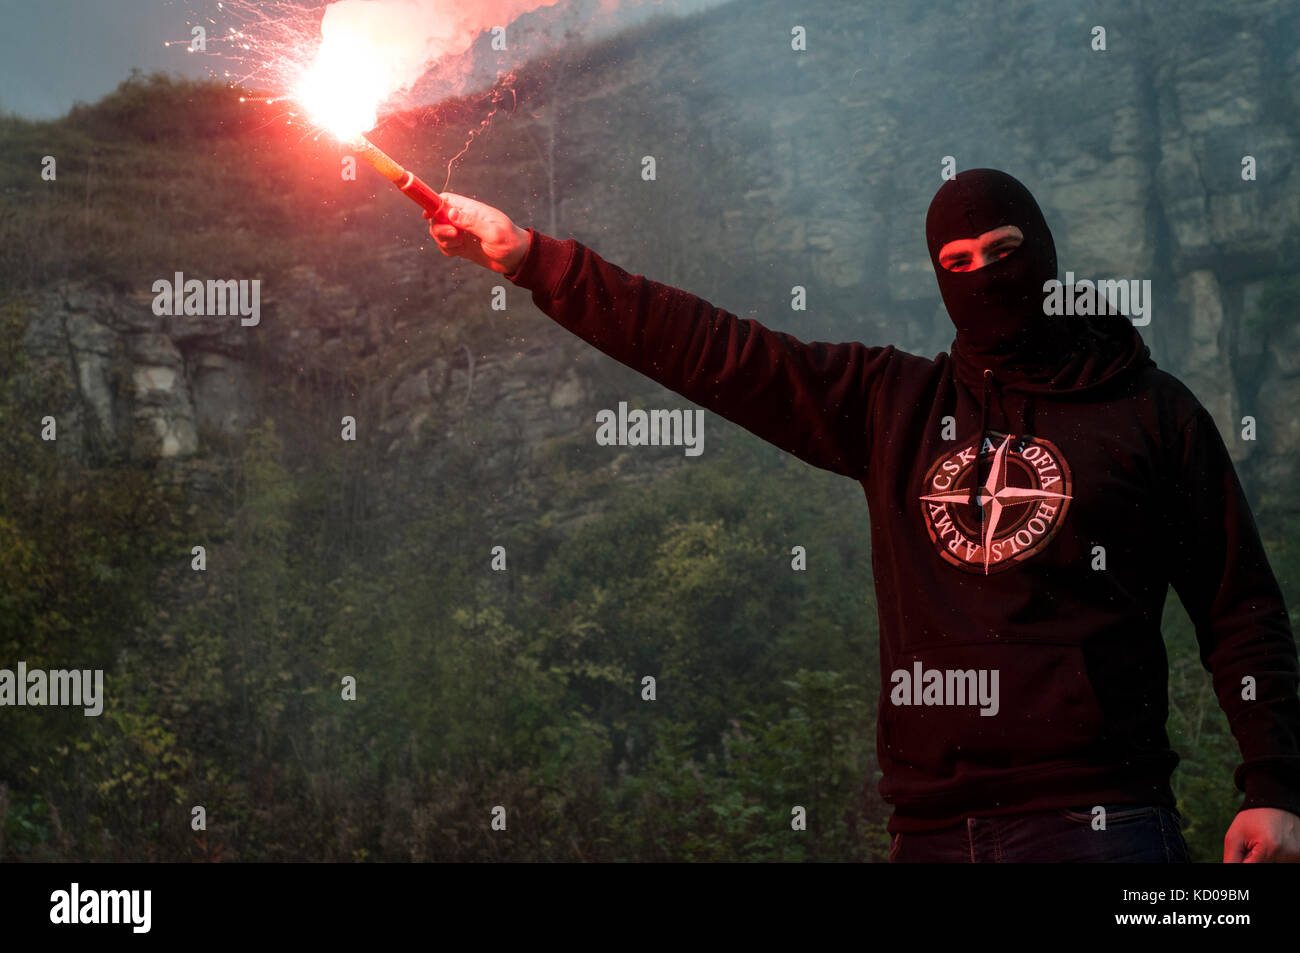 Eastern European Football Hooligan Stands with a lit flare gun. Stock Photo